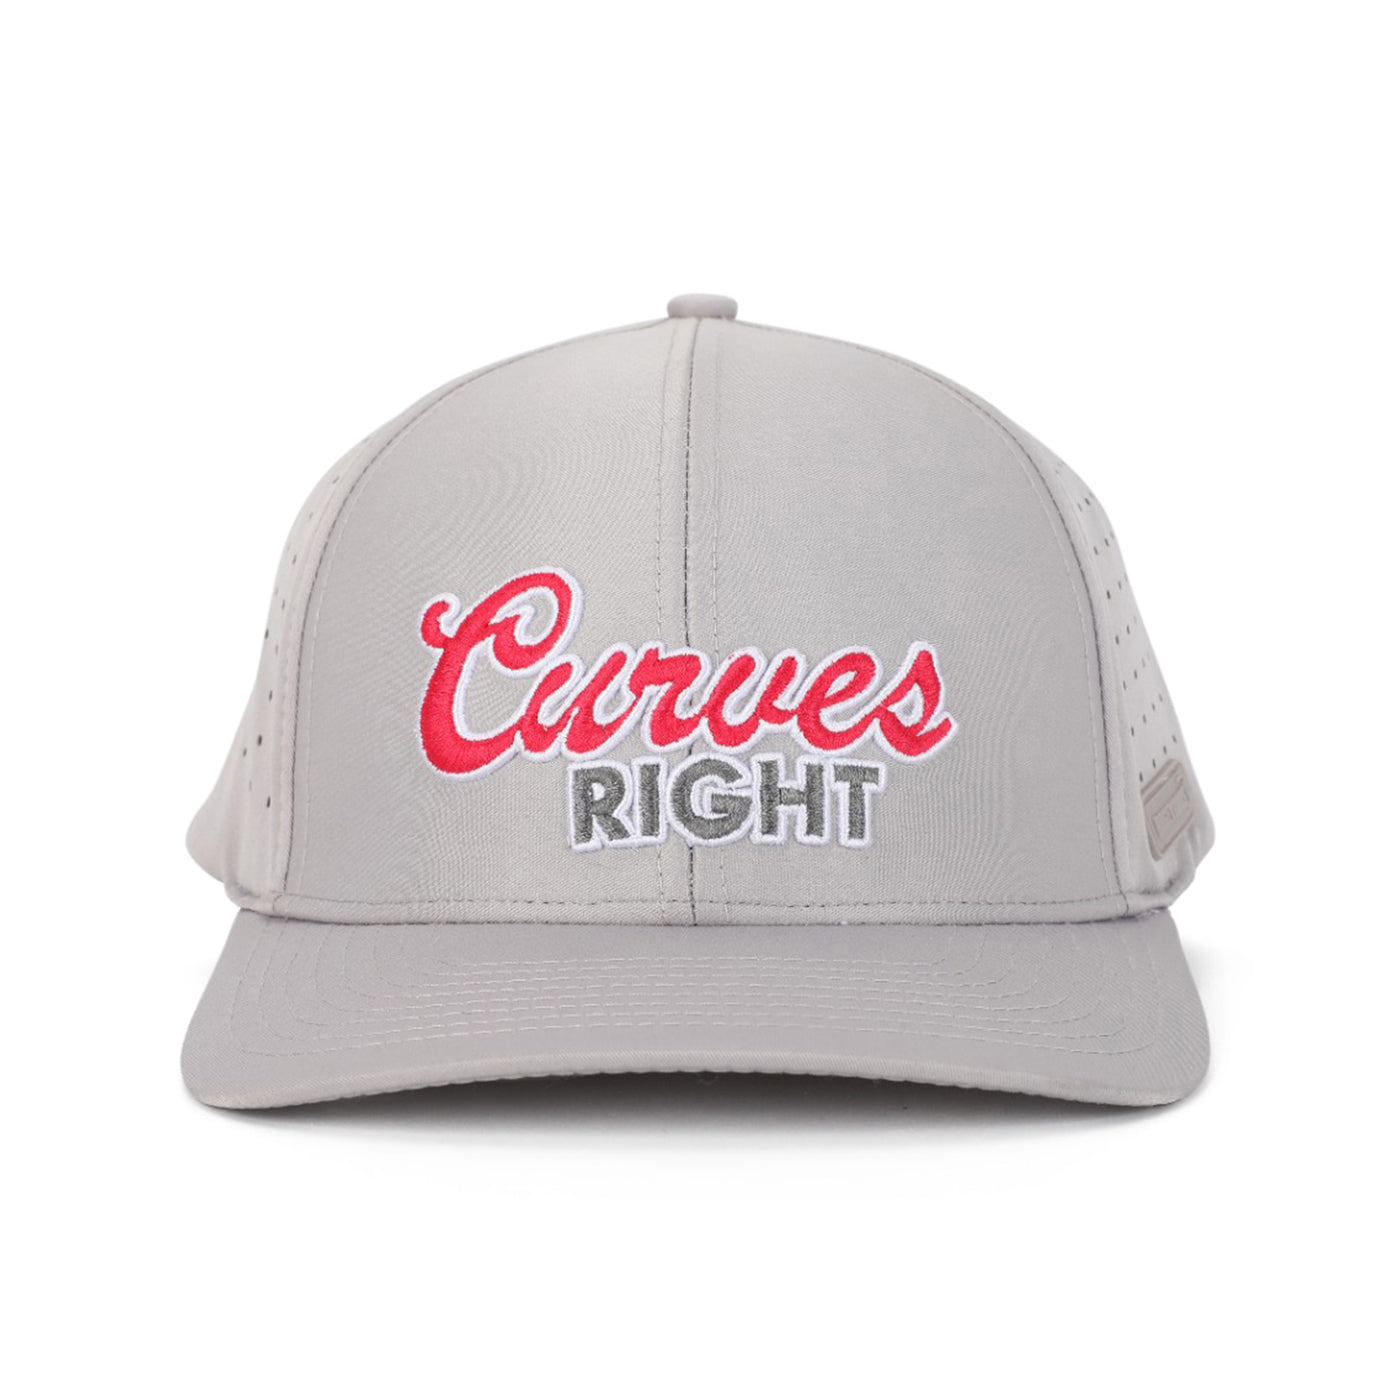 Curves Right - Performance Golf Hat - Fitted